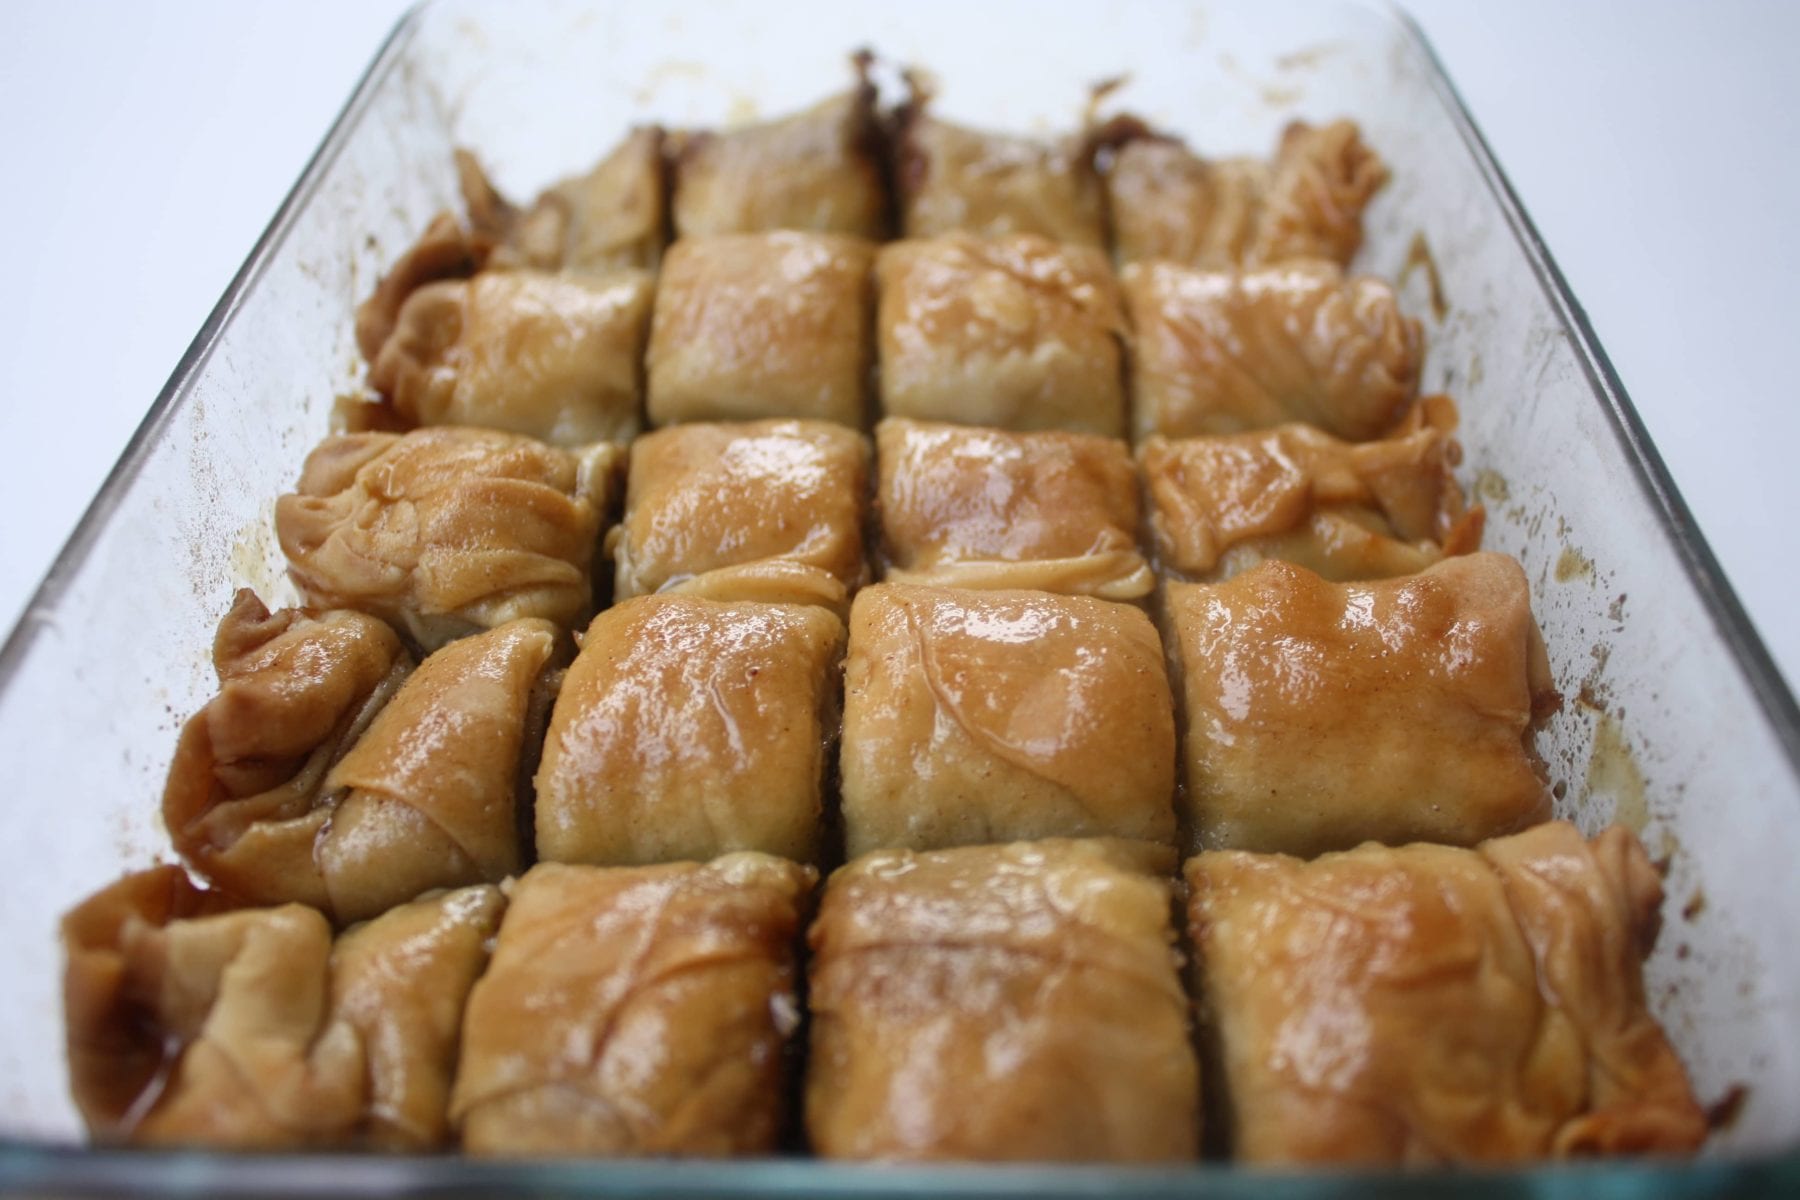 Daring Bakers June 2011 - Home made Phyllo and Baklava Rolls